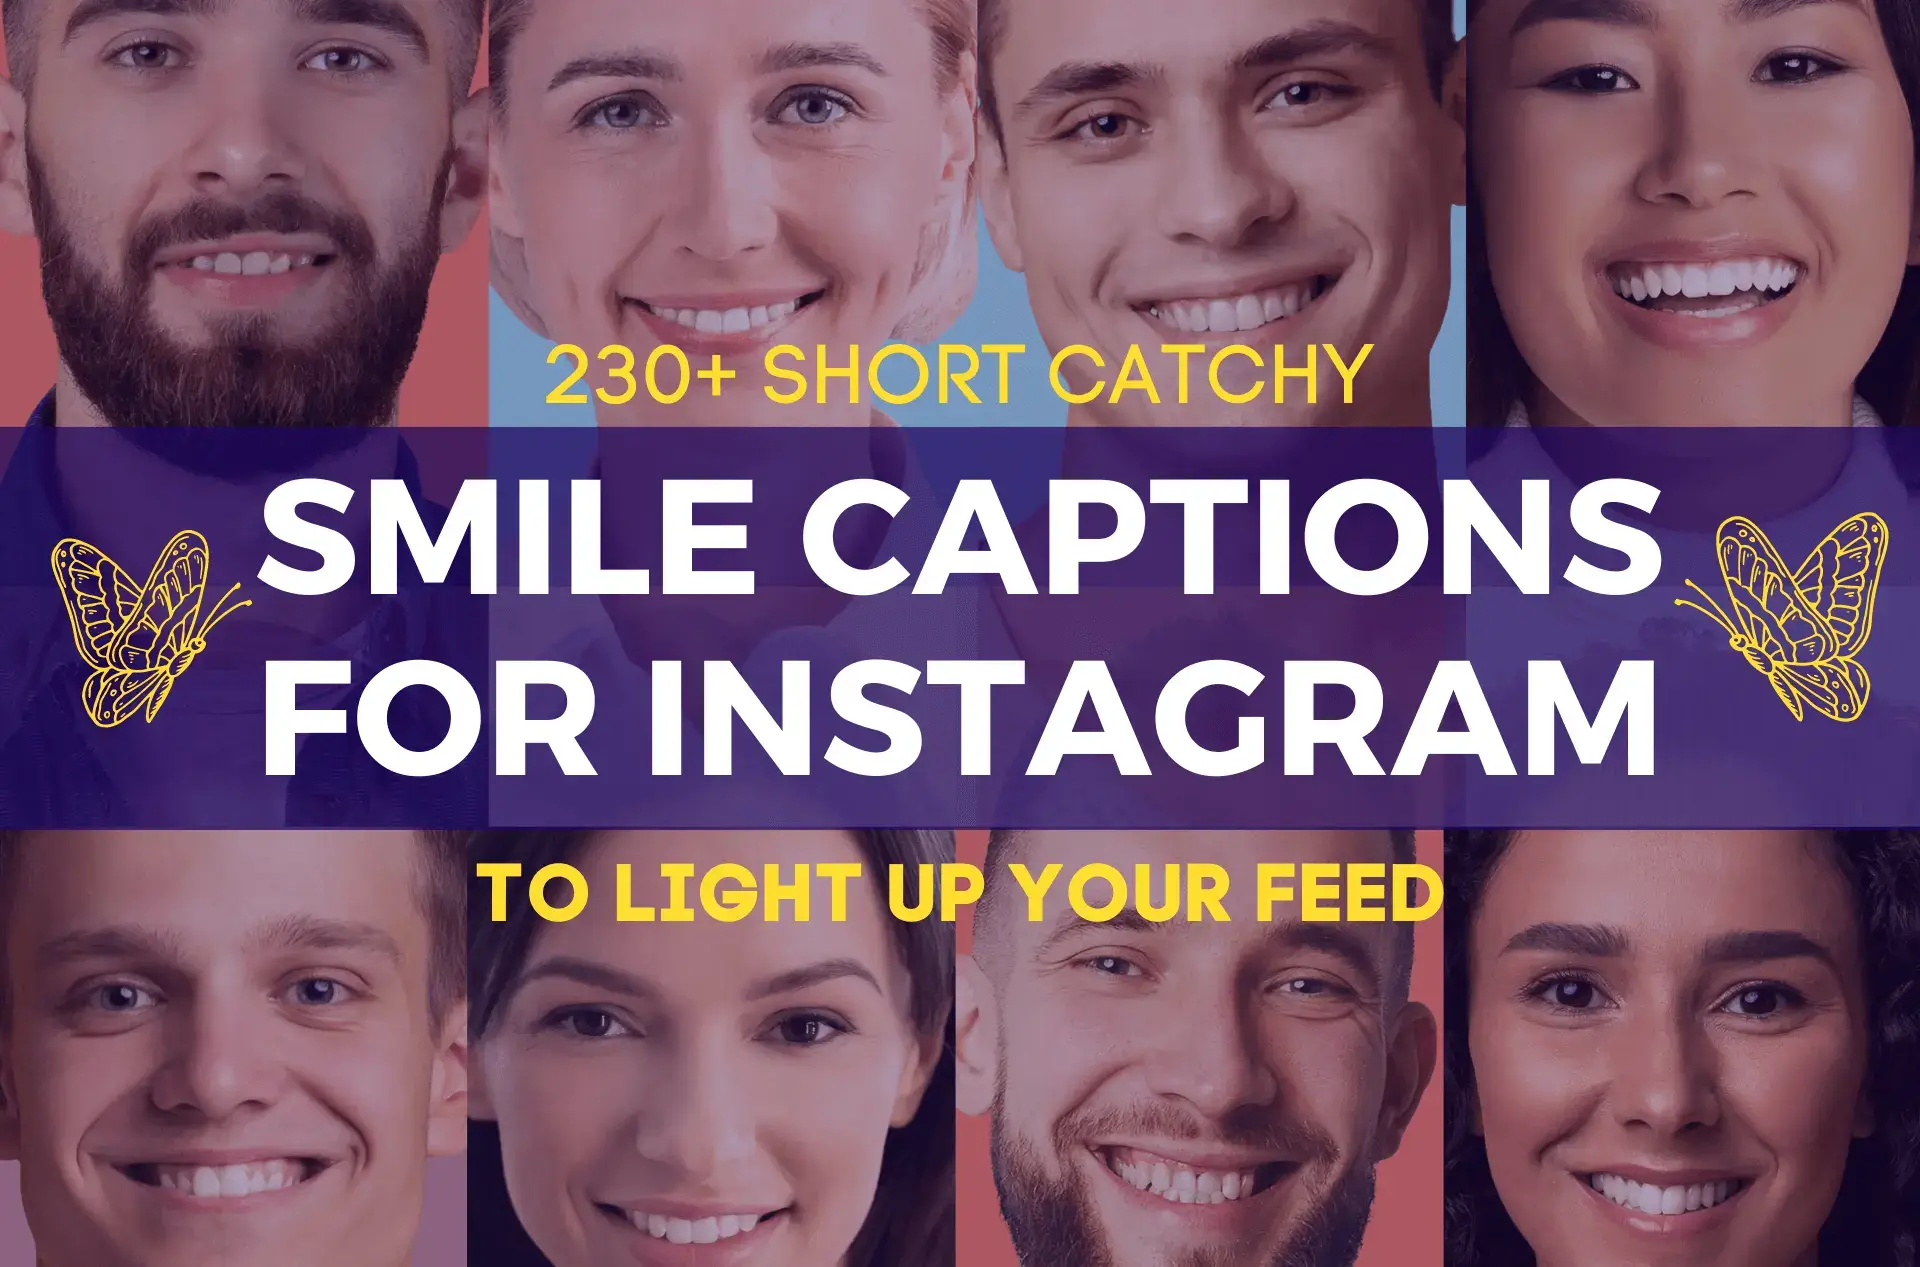 Best Smile Captions: Spread Joy with Perfect Instagram Quotes! Discover the best smile captions for Instagram to make your selfies shine in the virtual world of smiles! 😊 #BestSmileCaptions #InstagramQuotes